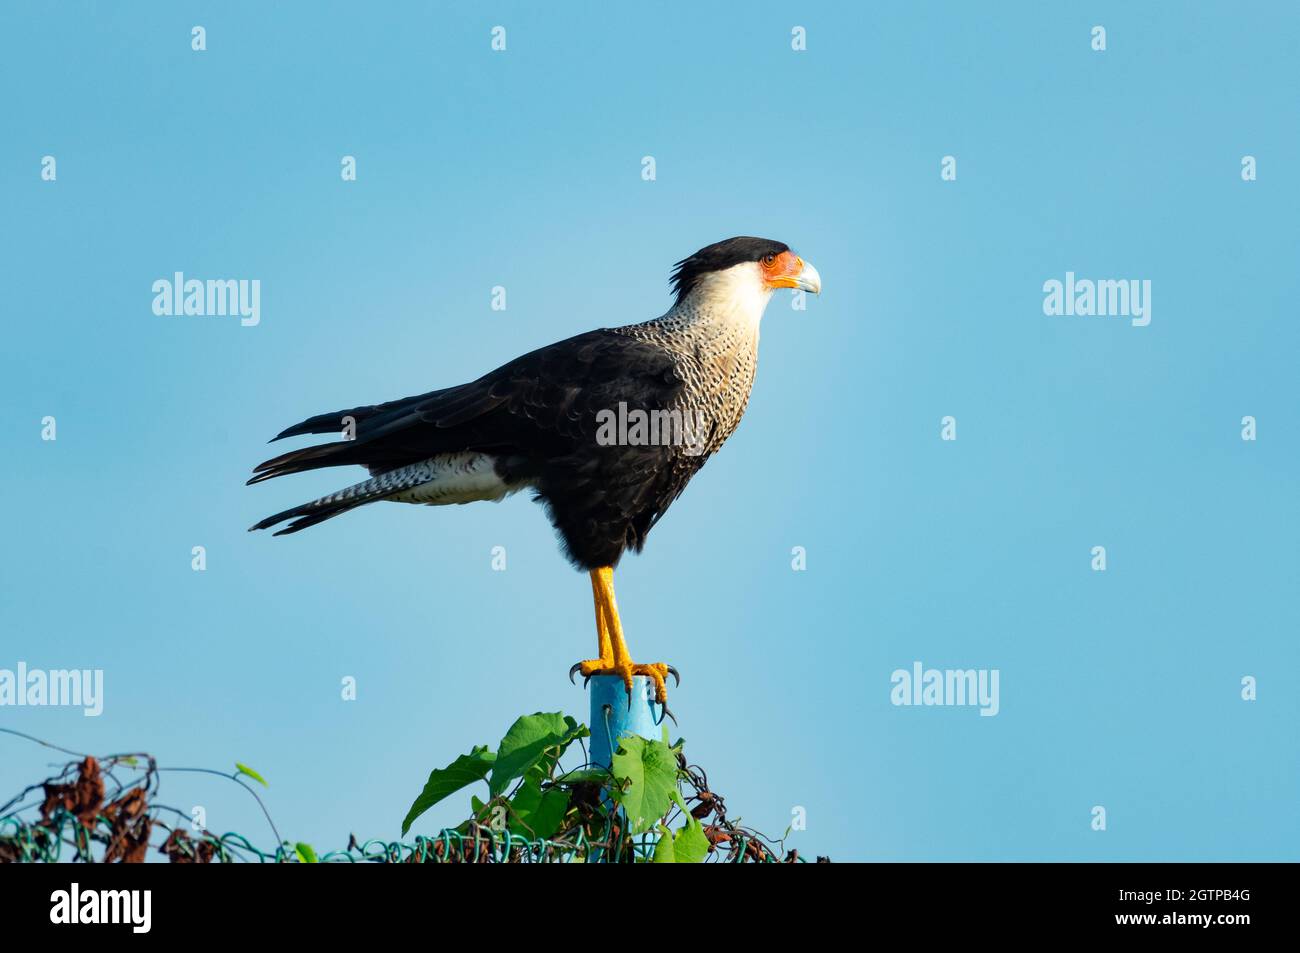 A Crested Caracara (Caracara plancus) perching on a chain link fence with ivy naturally lit by sunlight. Stock Photo